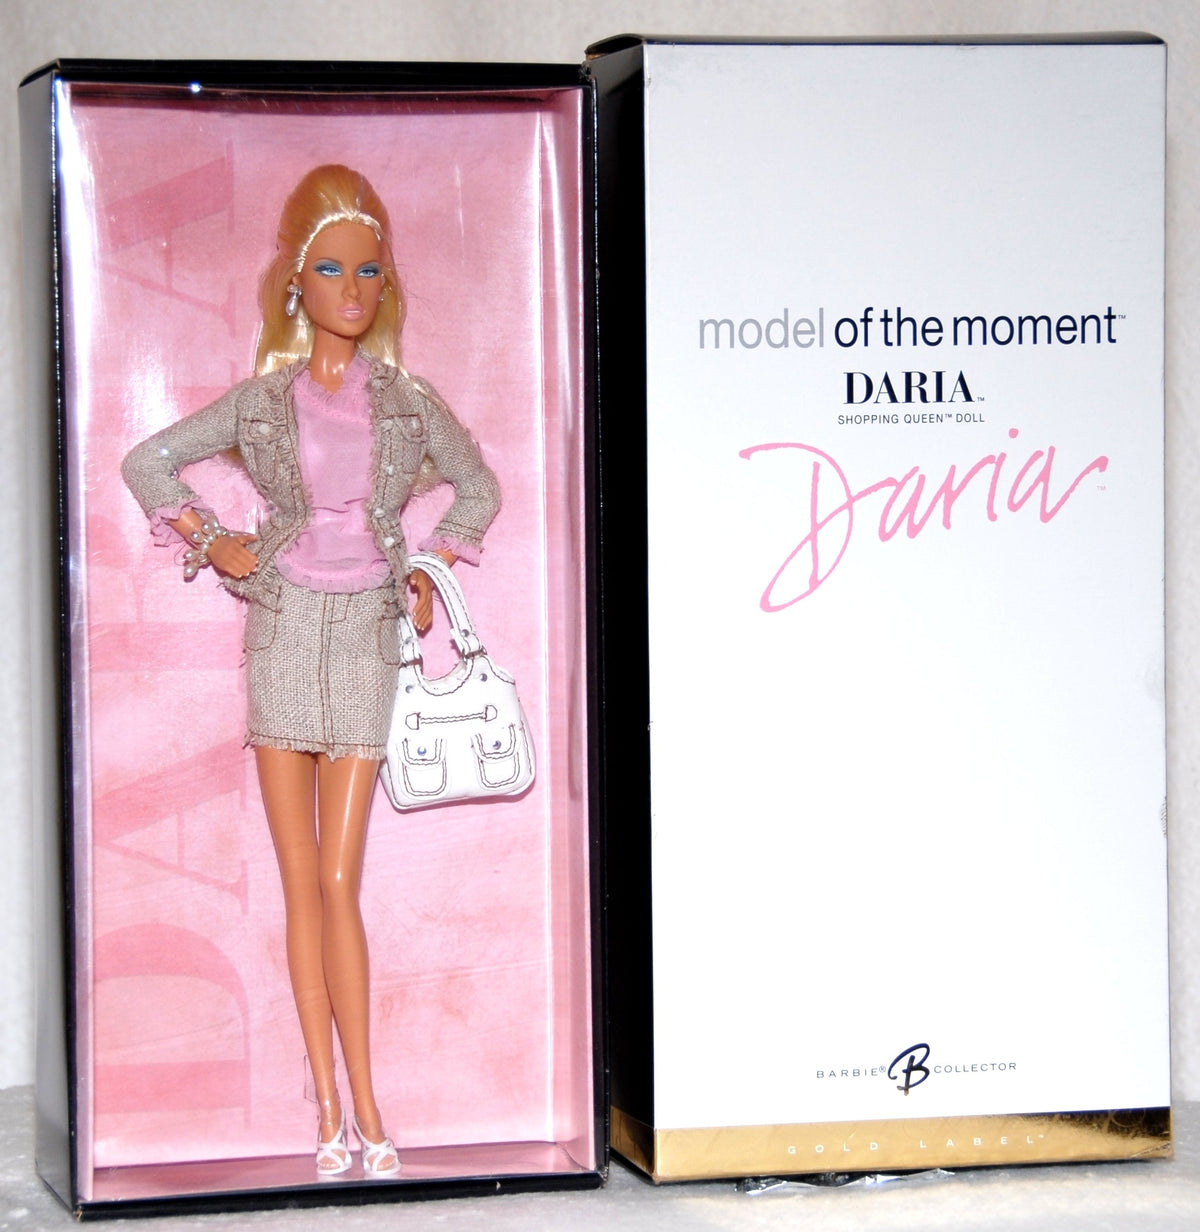 Barbie Fall 2005 Model of The Moment, Daria Shopping Queen Doll - Gold Label, Collector (1 Each)